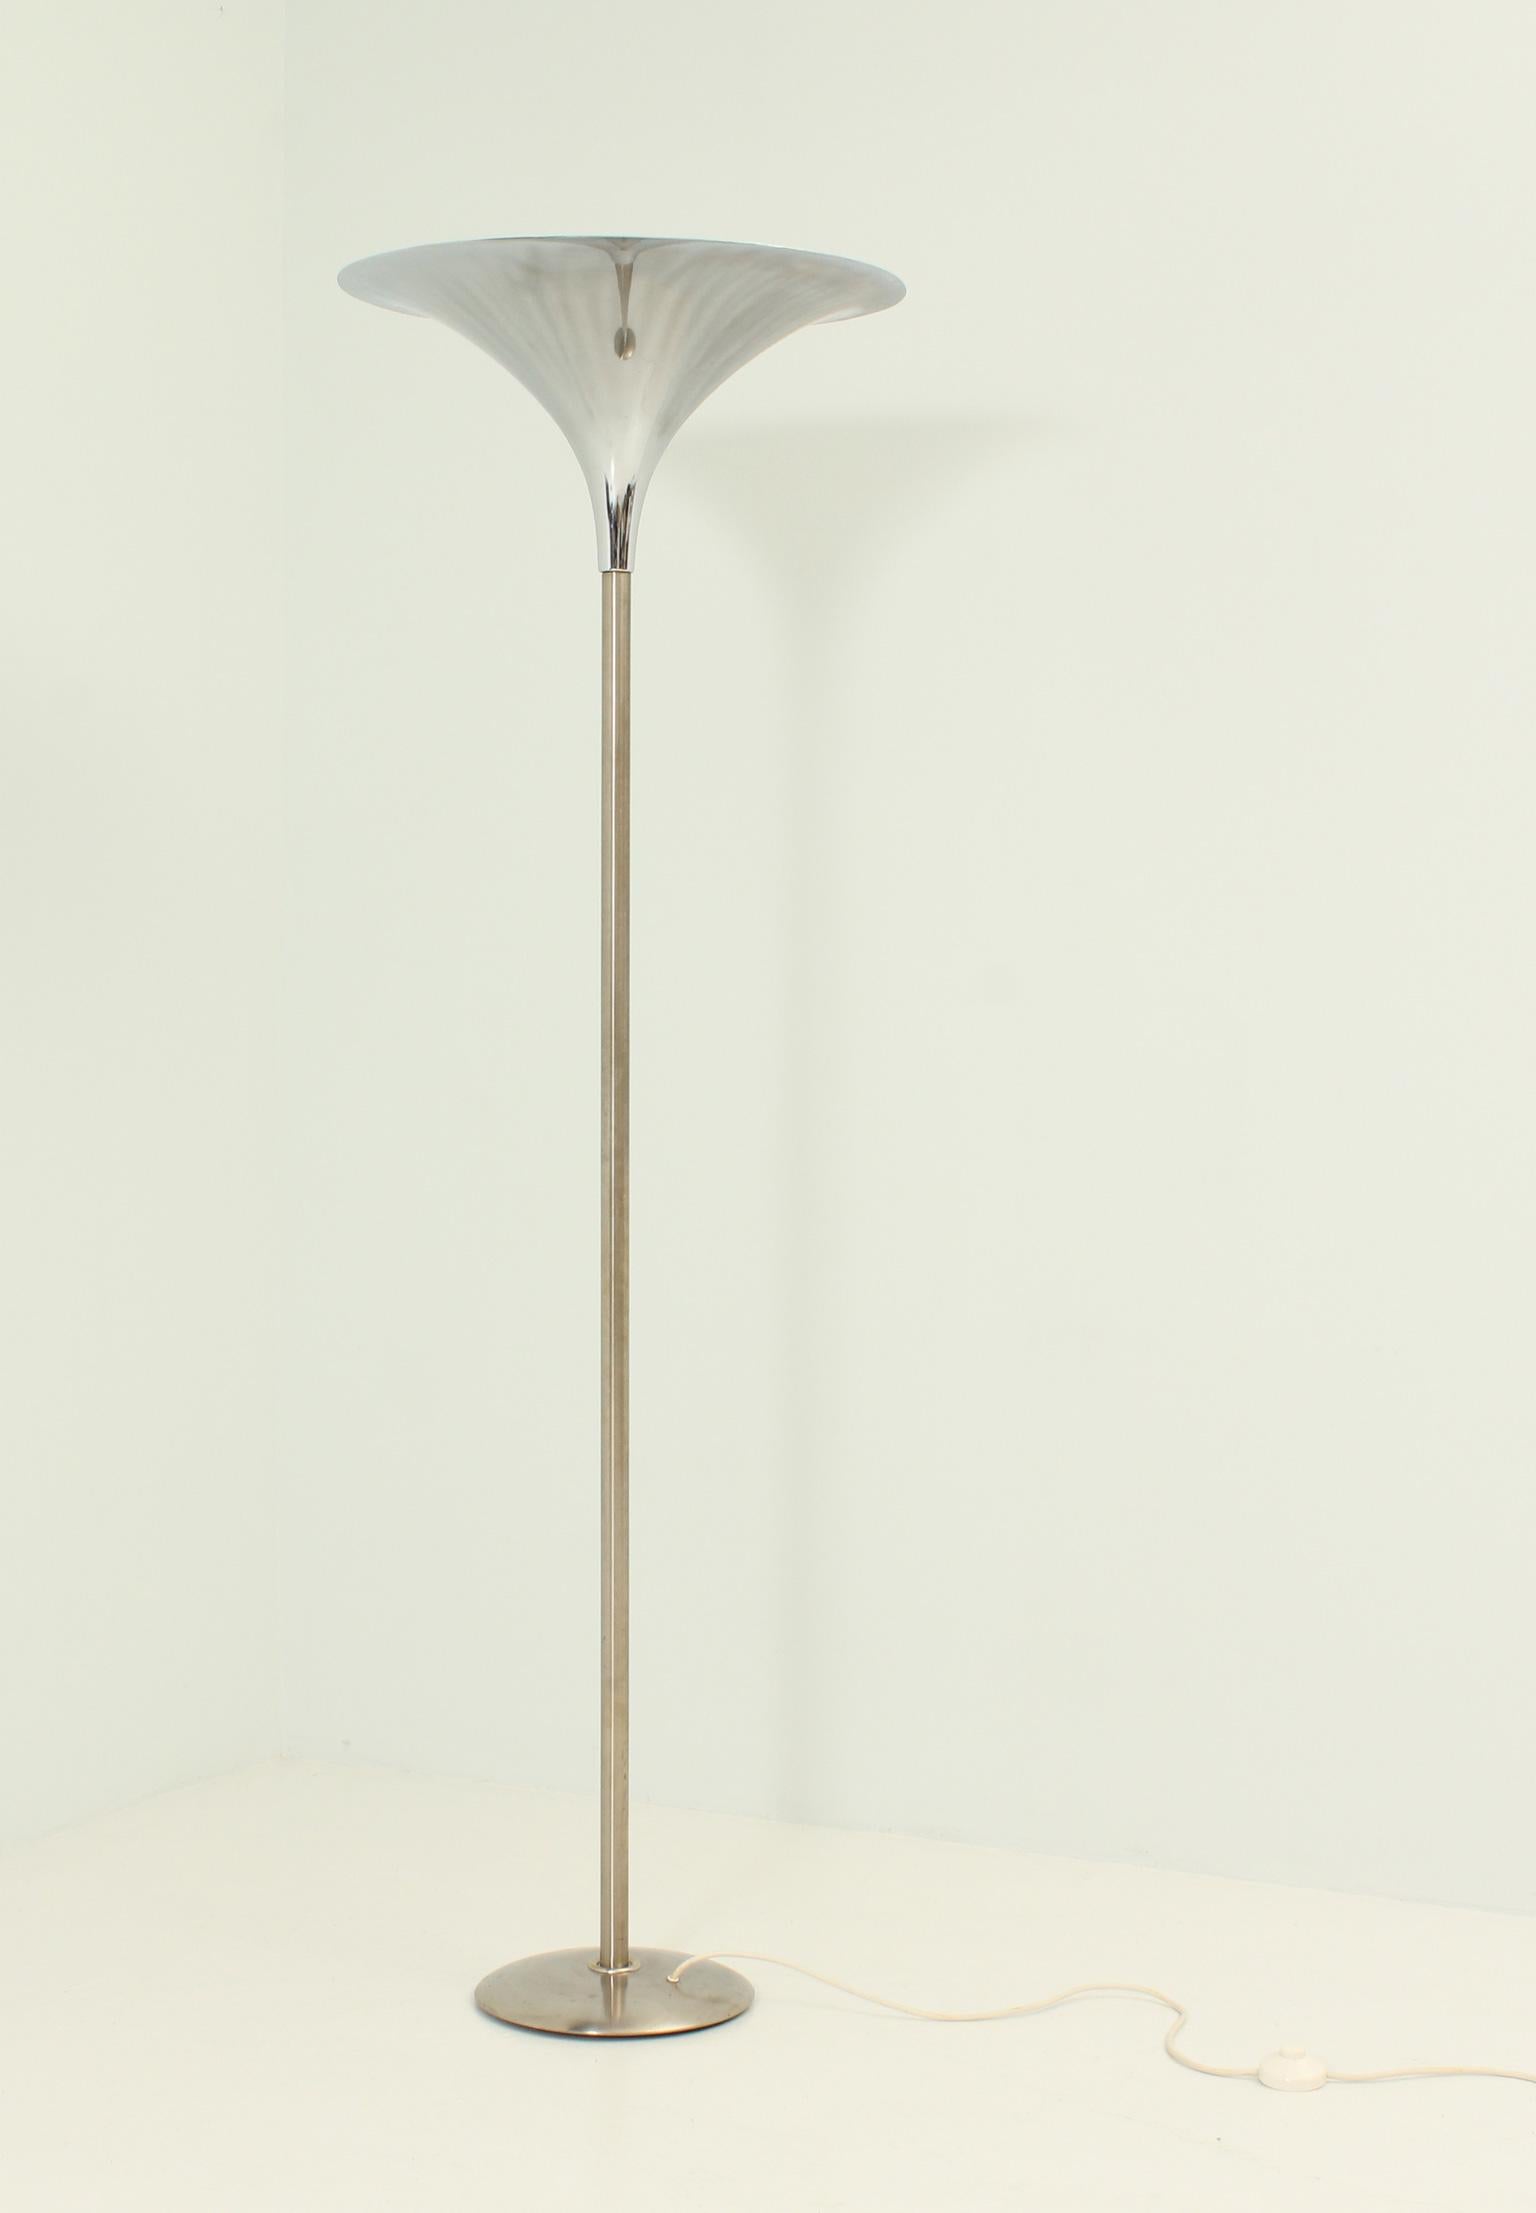 Large floor lamp from 1970's with an art deco touch. Chromed metal and polished steel.